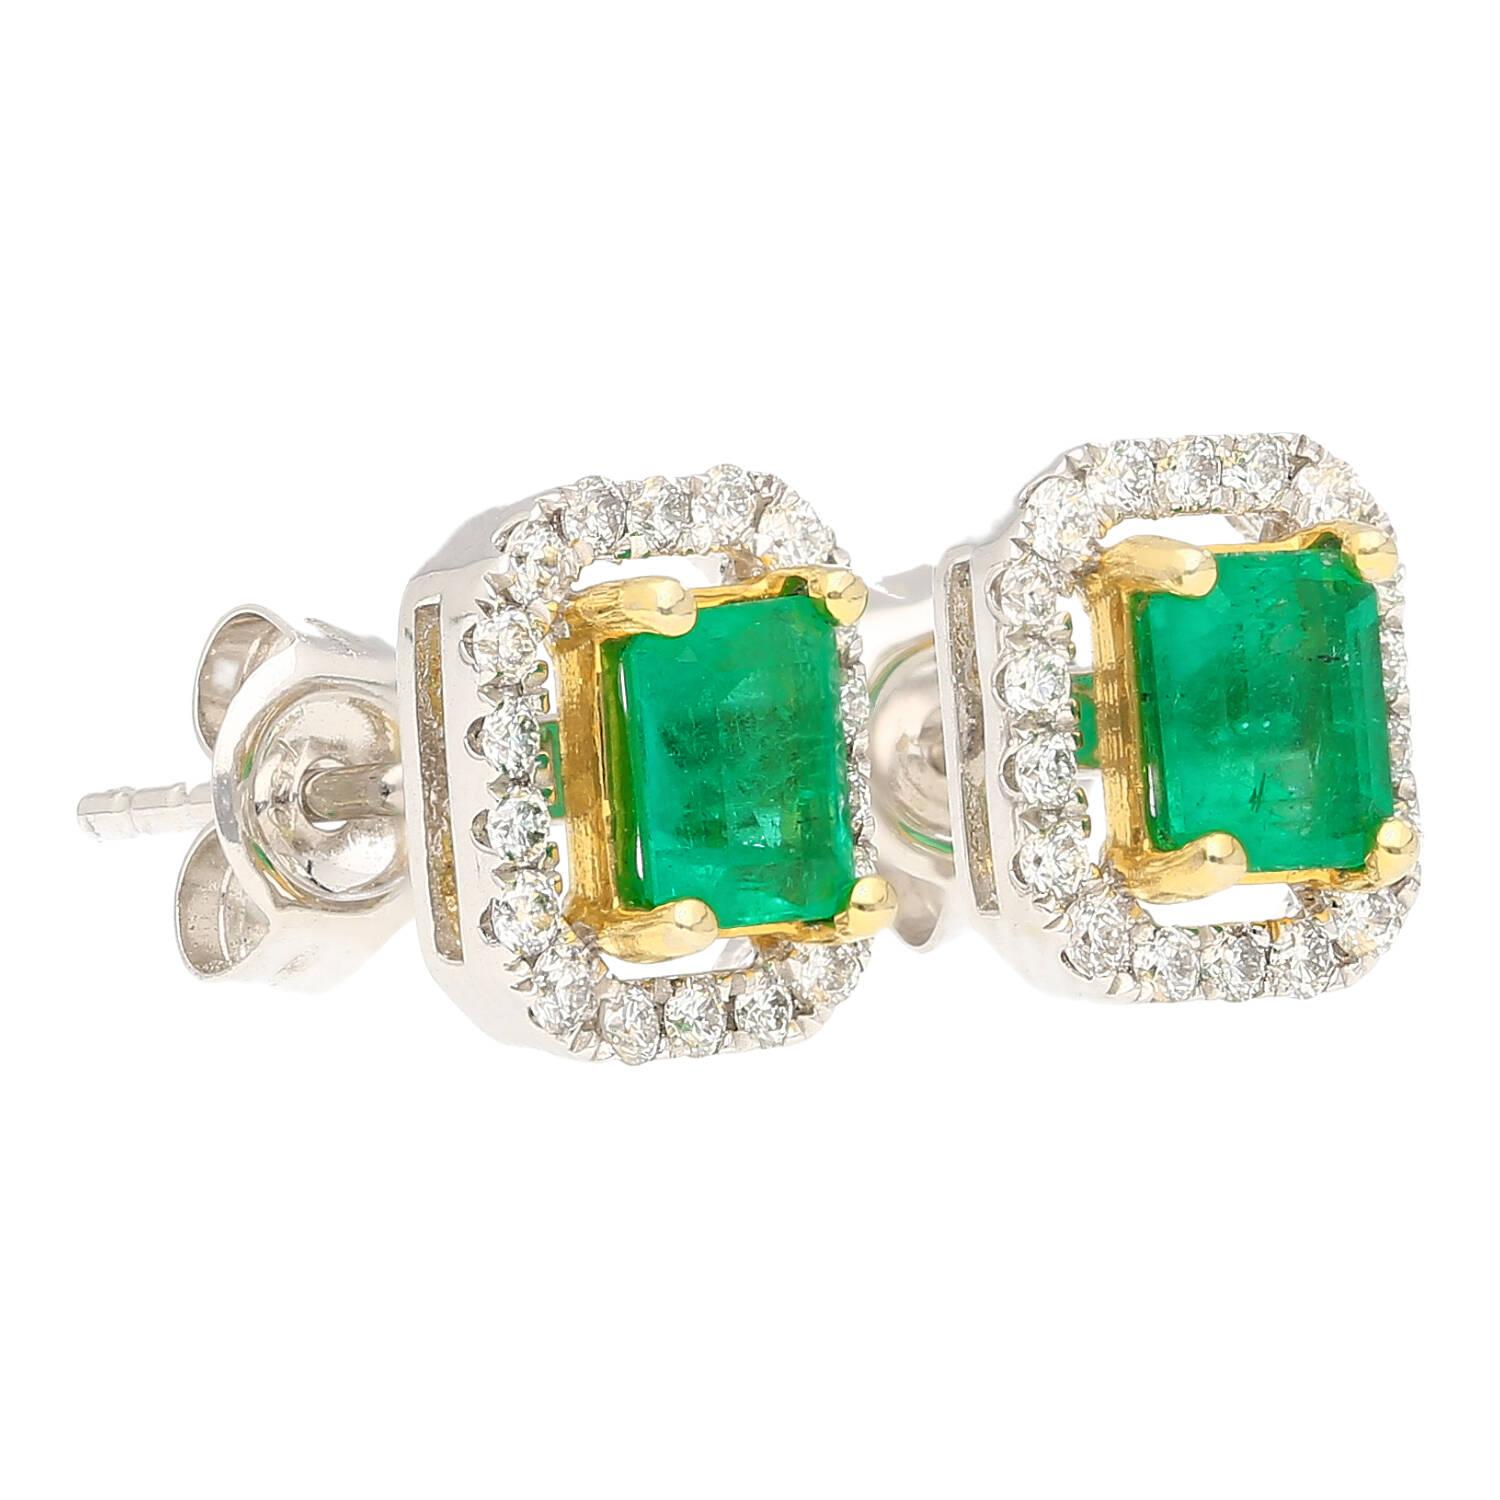 Classic 1 Carat Natural Emerald and Diamond Halo Stud Earrings in 18k White Gold In New Condition For Sale In Miami, FL